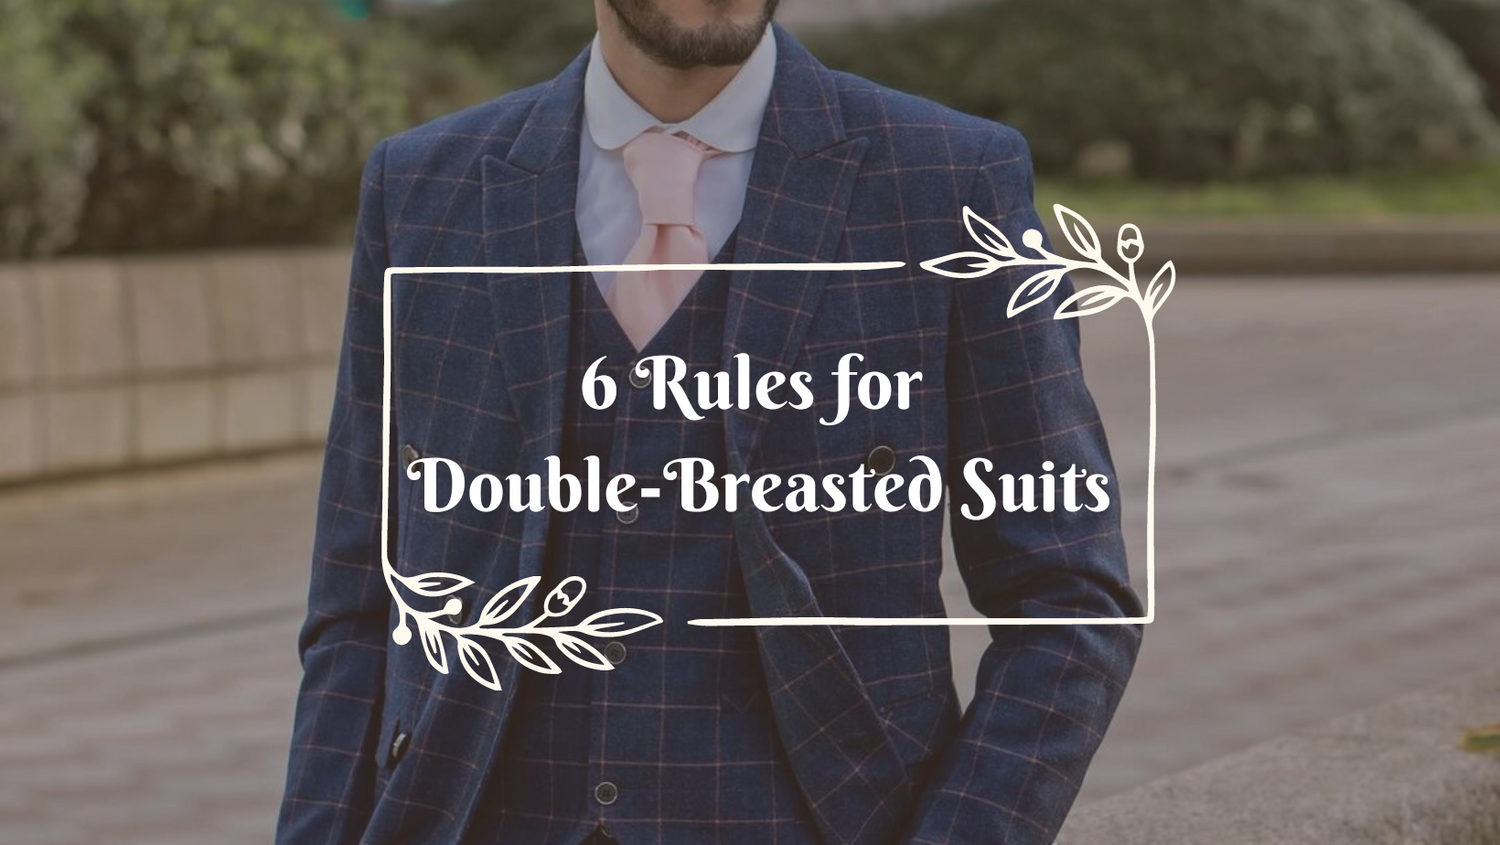 6 Rules for Double-Breasted Suits